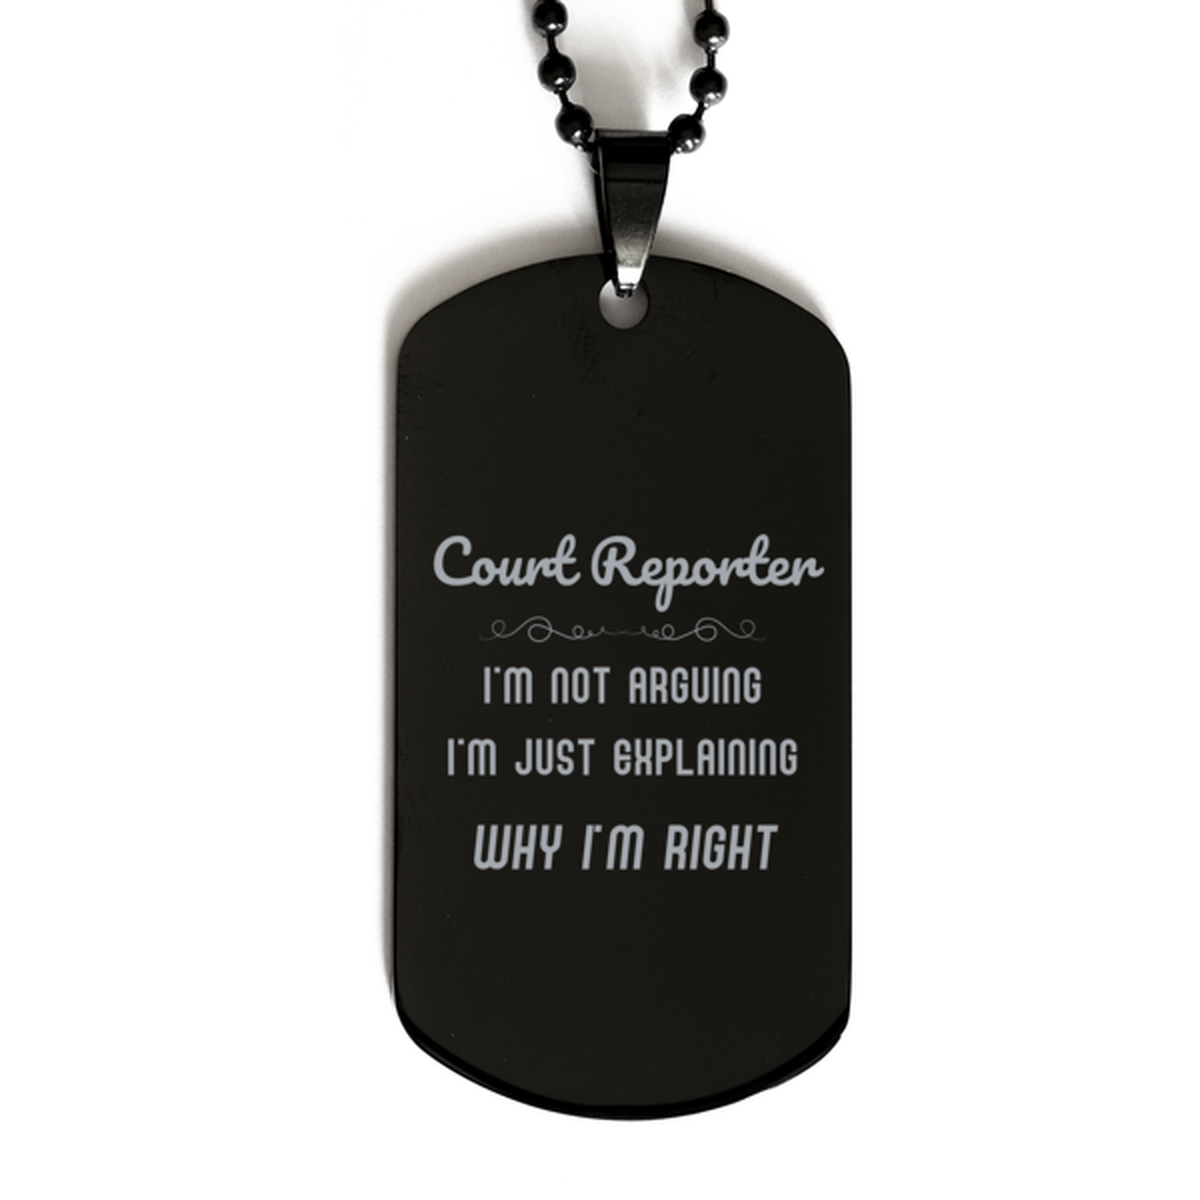 Court Reporter I'm not Arguing. I'm Just Explaining Why I'm RIGHT Black Dog Tag, Funny Saying Quote Court Reporter Gifts For Court Reporter Graduation Birthday Christmas Gifts for Men Women Coworker